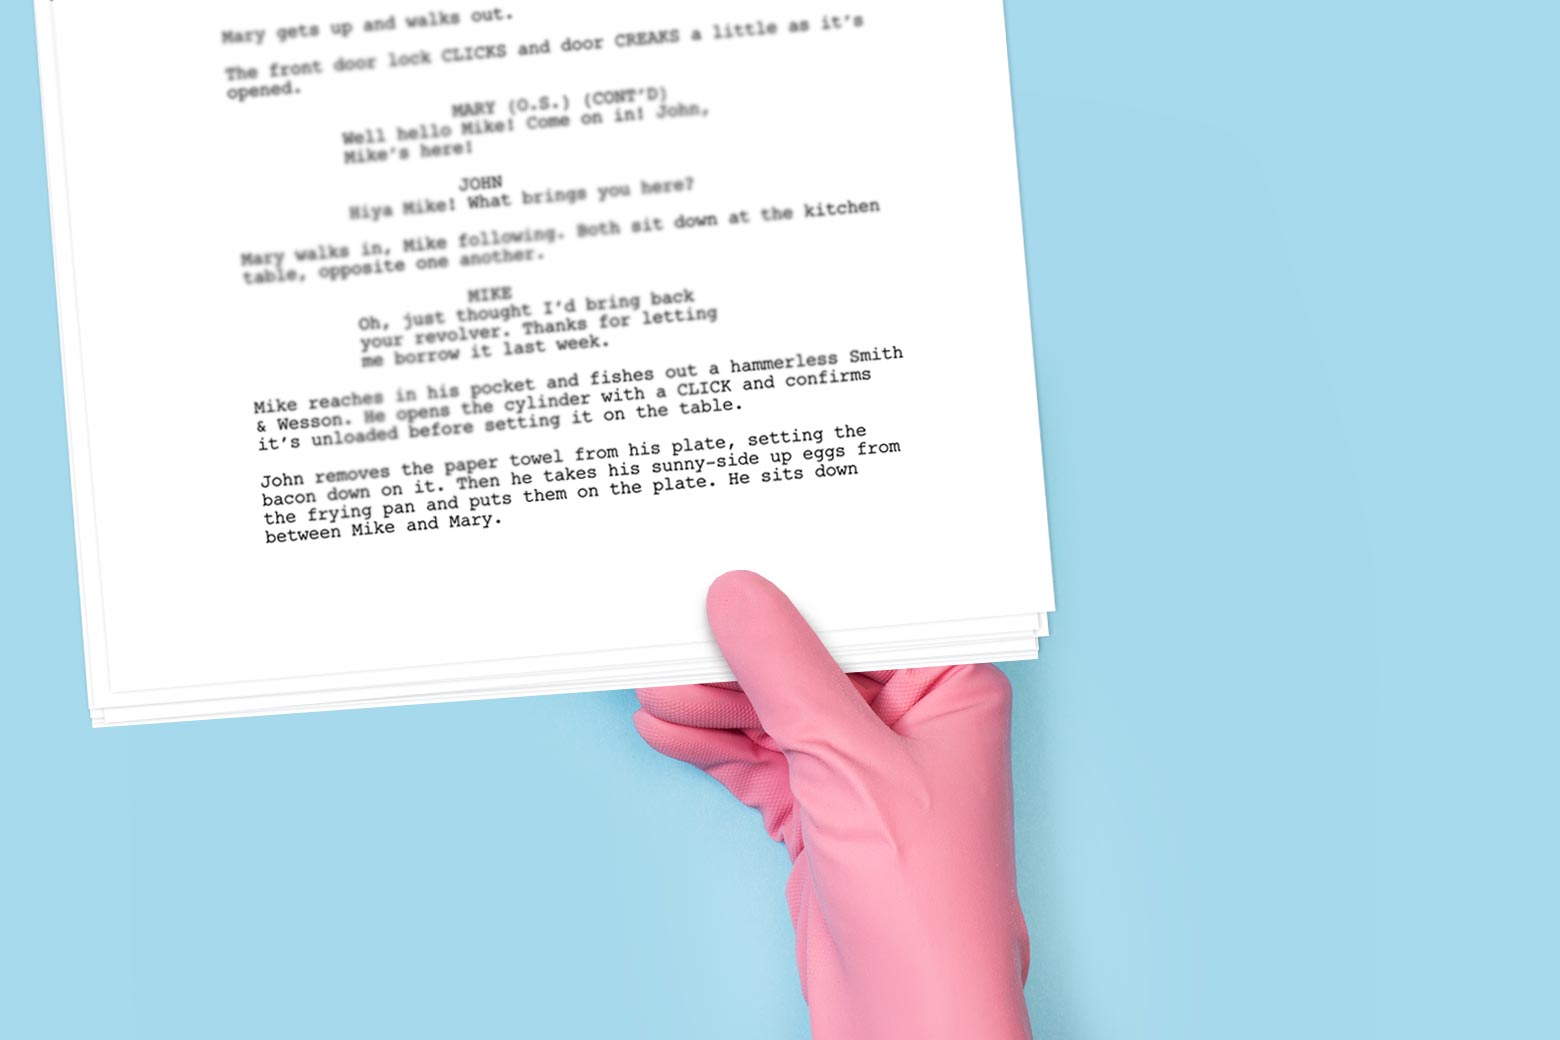 A hand wearing a pink medical glove holds a script.